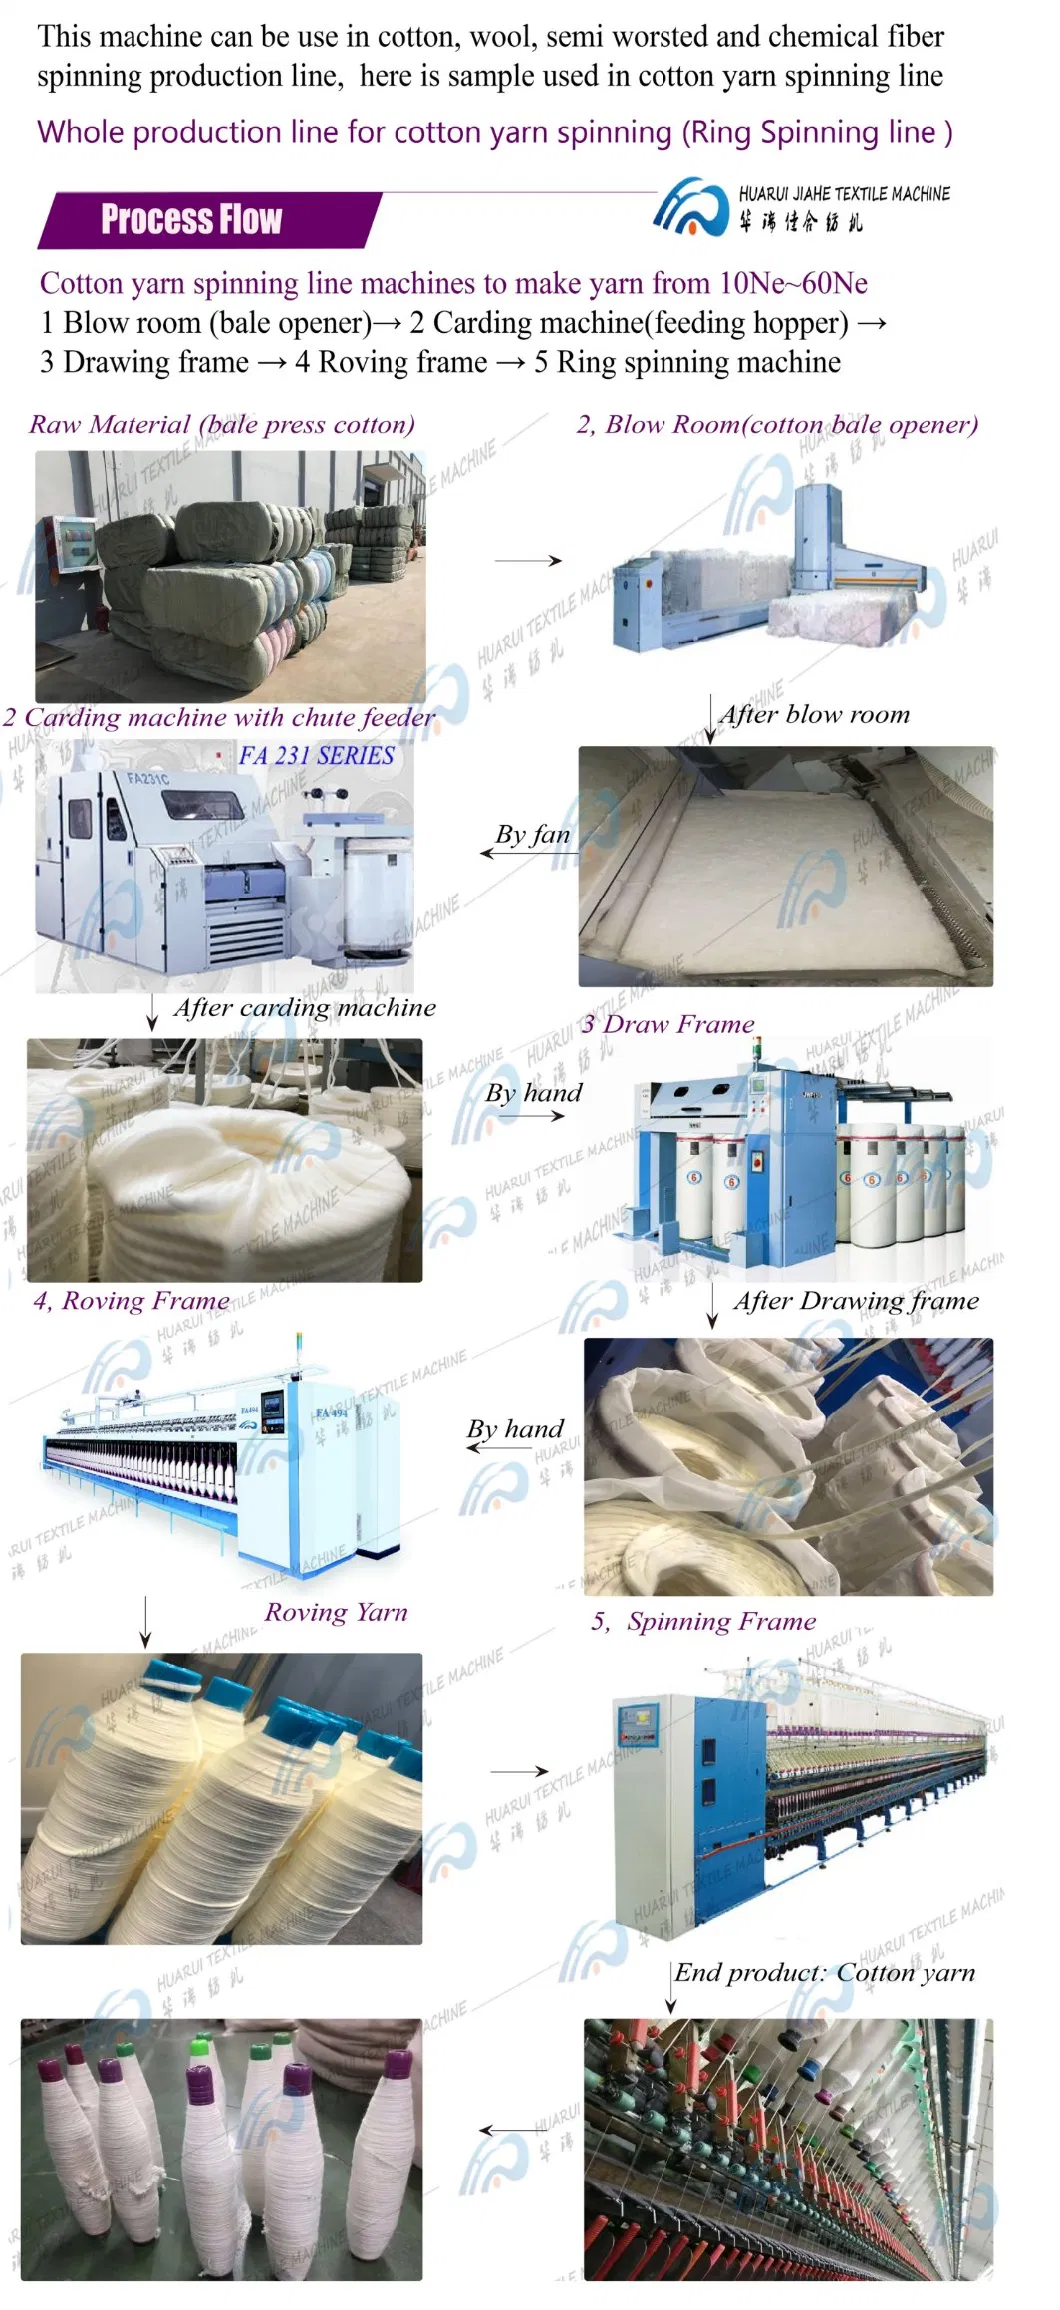 Advanced Equipment Experience Normal Temperature Spray Type Horizontal Hank Yarn Dyeing Machine for Organic Polyester Cotton Yarn 16 Counts